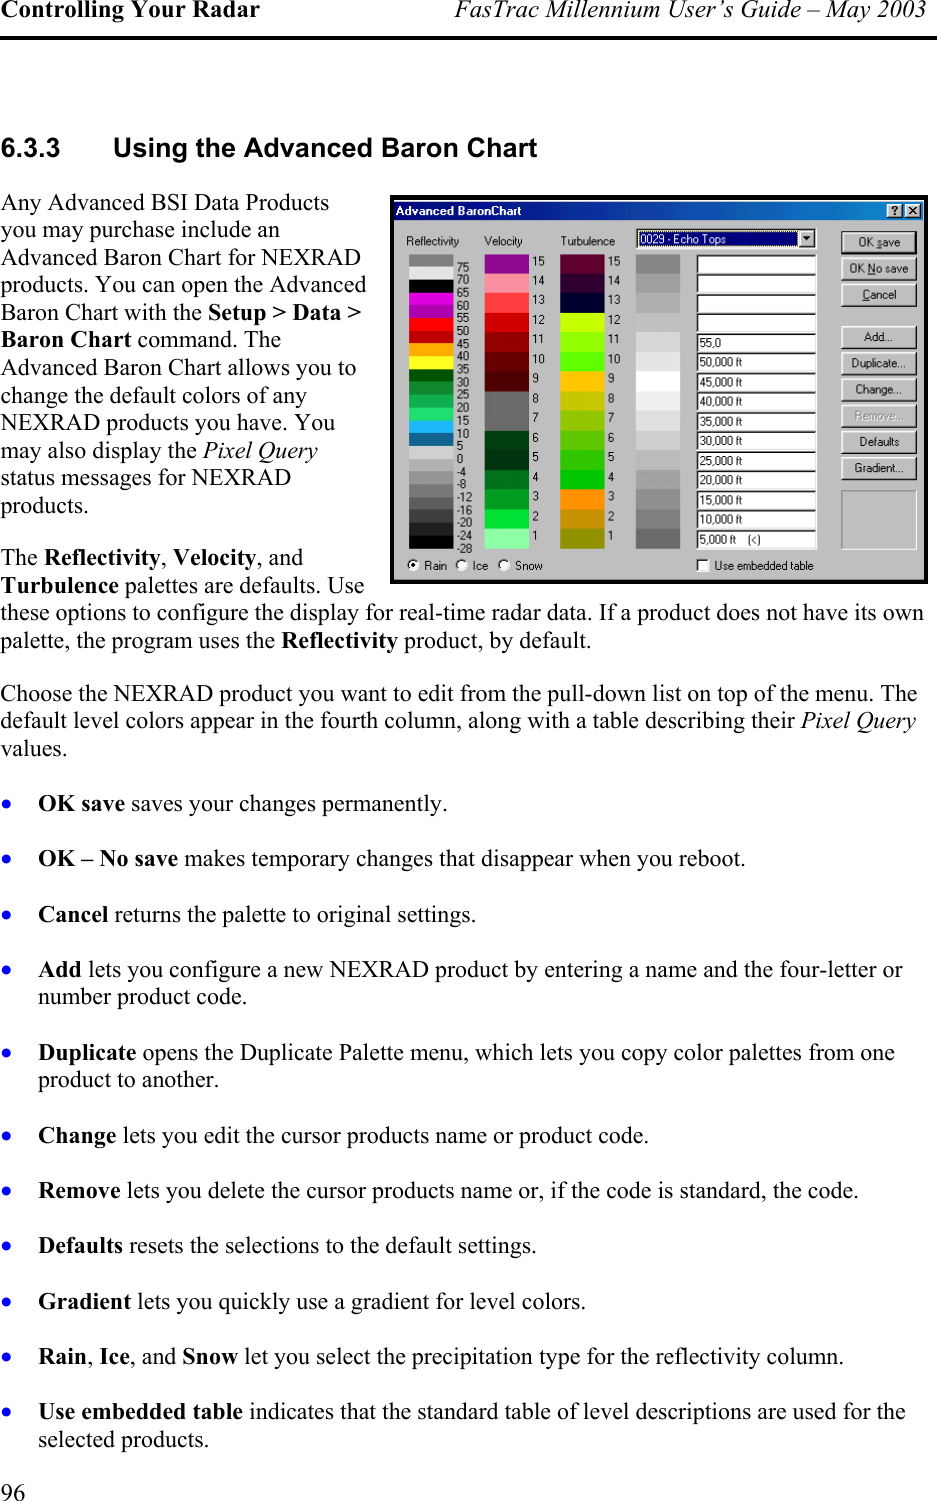 Controlling Your Radar  FasTrac Millennium User’s Guide – May 2003 6.3.3  Using the Advanced Baron Chart Any Advanced BSI Data Products you may purchase include an Advanced Baron Chart for NEXRADproducts. You can open the AdvanceBaron Chart with the Setup &gt; Data &gt; Baron Chart command. The Advanced Baron Chart allows you to change the default colors of any NEXRAD products you have. Youmay also display the Pixel Questatus messages for NEXRAD  d  ry products. its own ectivity product, by default. • • • • • • • • • • • The Reflectivity, Velocity, and Turbulence palettes are defaults. Use these options to configure the display for real-time radar data. If a product does not have palette, the program uses the ReflChoose the NEXRAD product you want to edit from the pull-down list on top of the menu. The default level colors appear in the fourth column, along with a table describing their Pixel Query values. OK save saves your changes permanently. OK – No save makes temporary changes that disappear when you reboot. Cancel returns the palette to original settings. Add lets you configure a new NEXRAD product by entering a name and the four-letter or number product code. Duplicate opens the Duplicate Palette menu, which lets you copy color palettes from one product to another. Change lets you edit the cursor products name or product code. Remove lets you delete the cursor products name or, if the code is standard, the code. Defaults resets the selections to the default settings. Gradient lets you quickly use a gradient for level colors. Rain, Ice, and Snow let you select the precipitation type for the reflectivity column. Use embedded table indicates that the standard table of level descriptions are used for the selected products. 96 